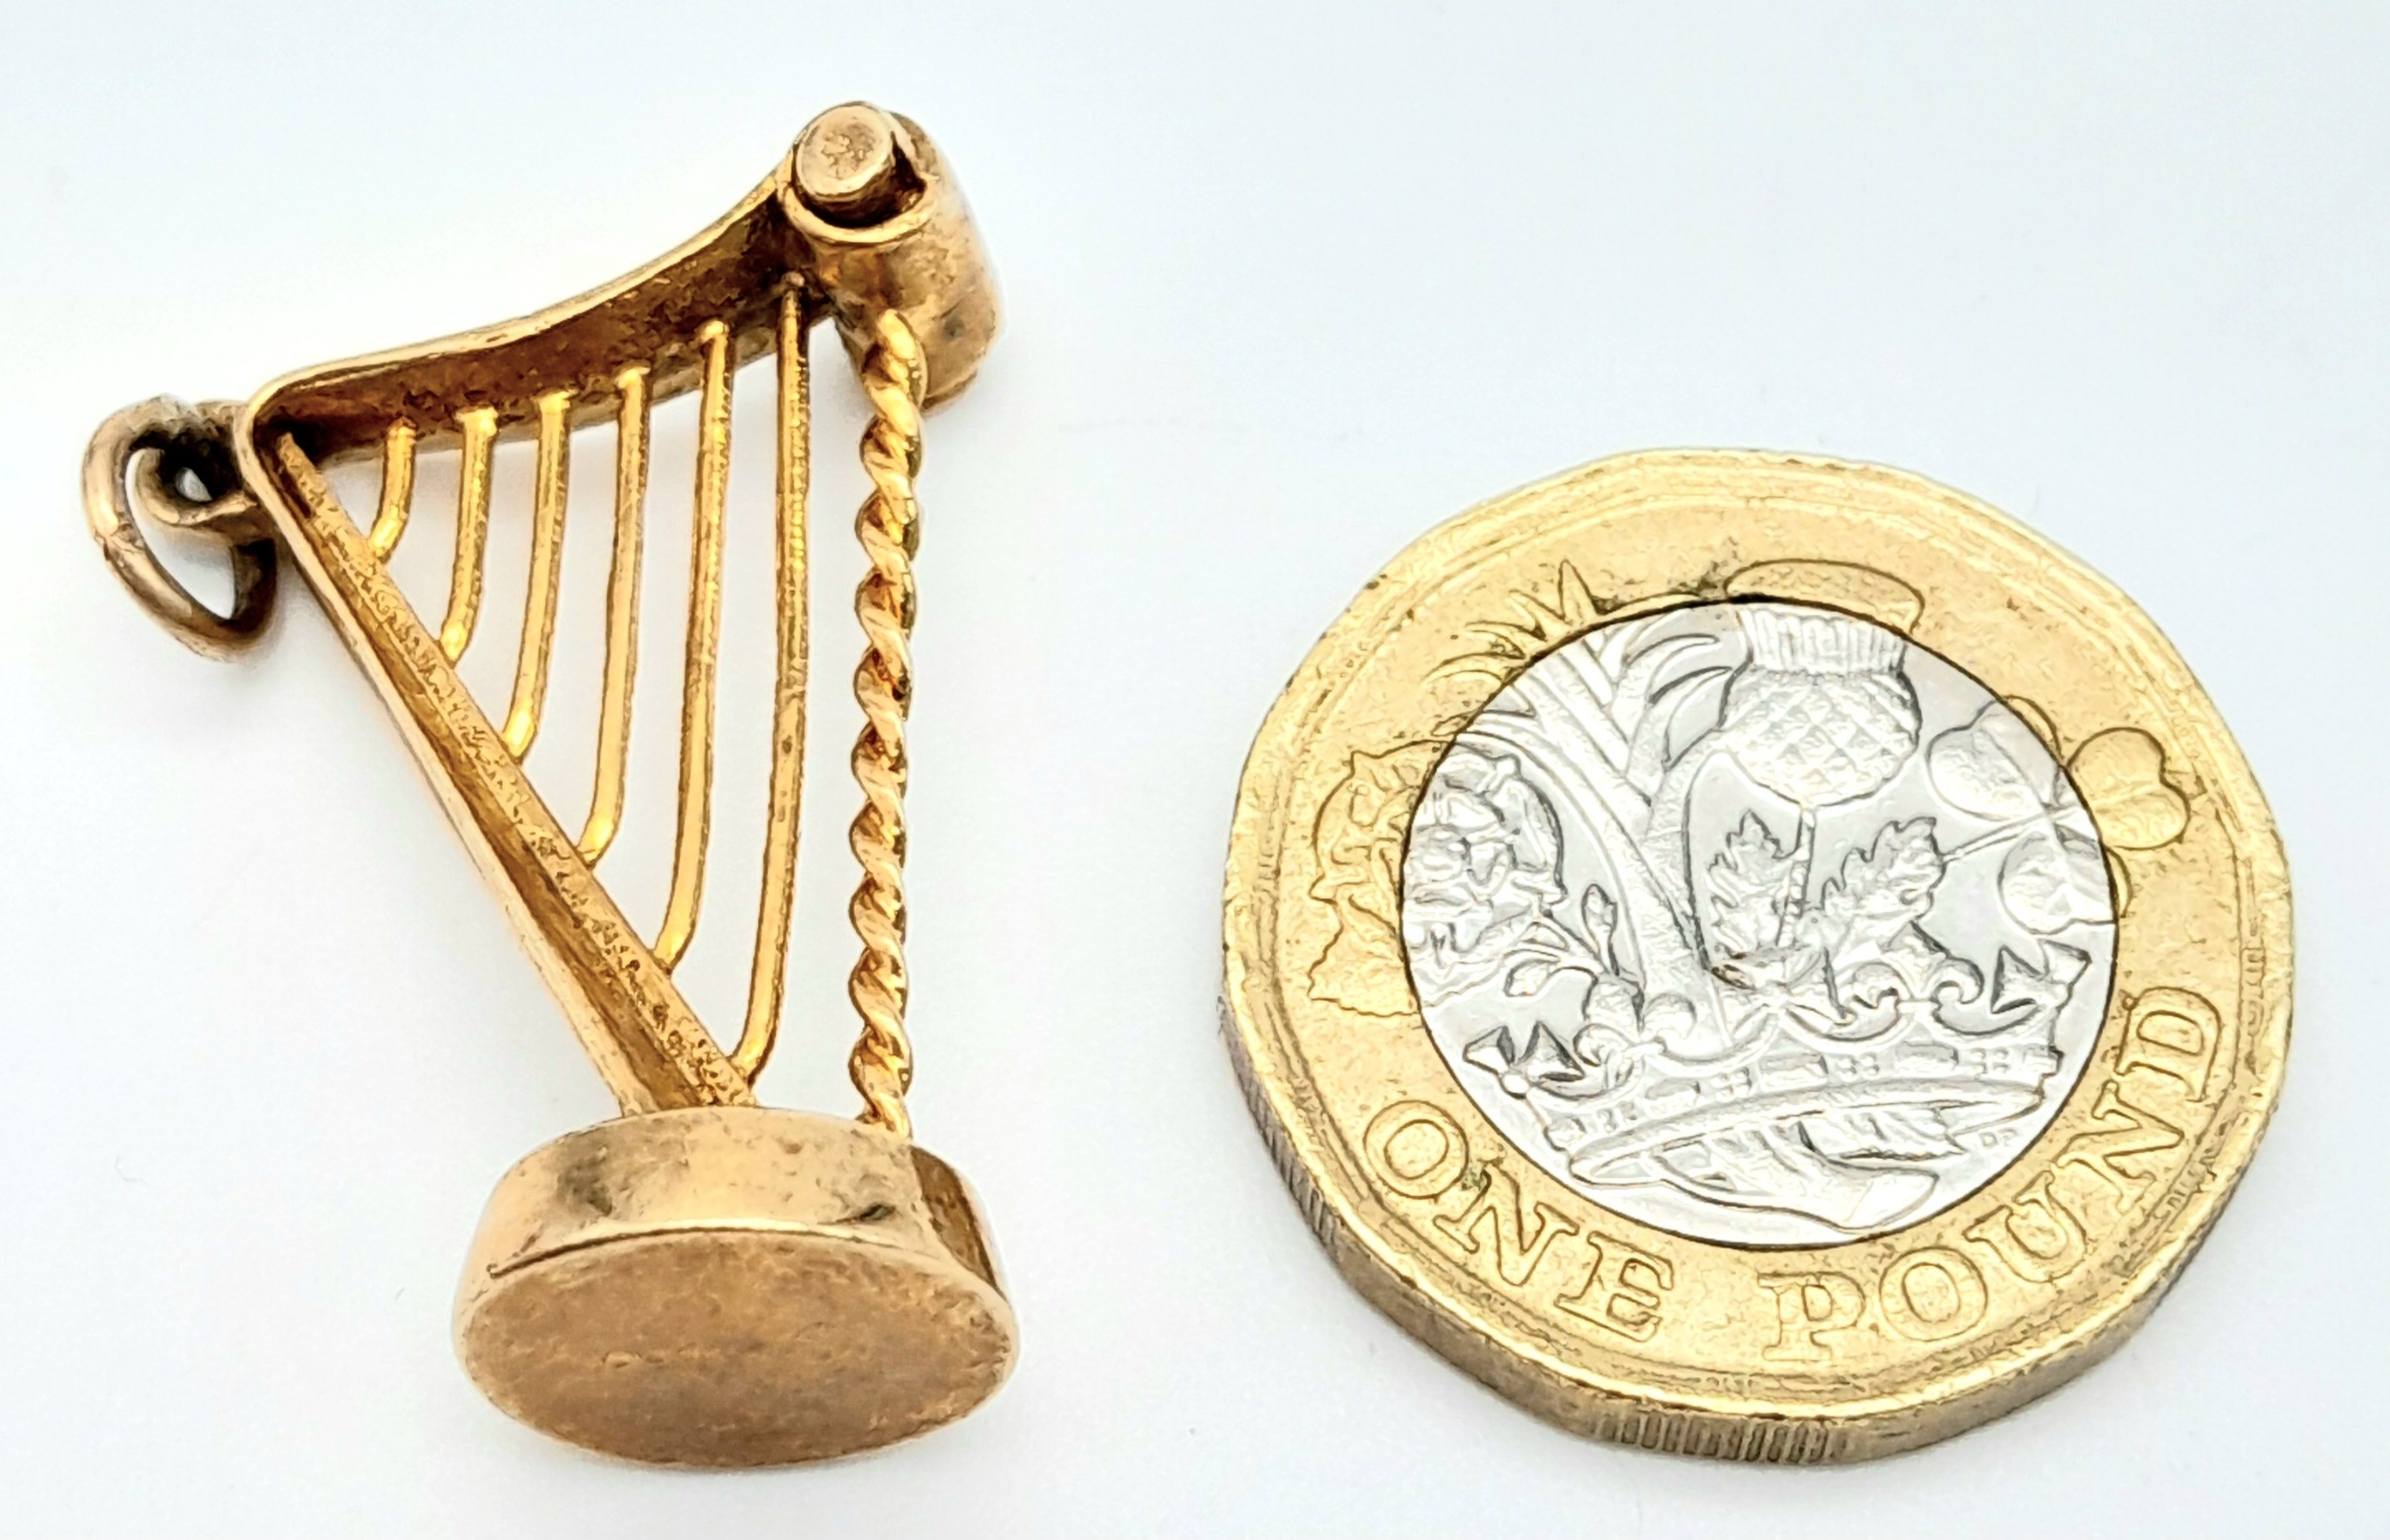 A 9K YELLOW GOLD IRISH HARP CHARM, POSSIBLY GUINESS THEMED. 2.9cm length, 4.2g weight. Ref: SC 8137 - Image 5 of 6